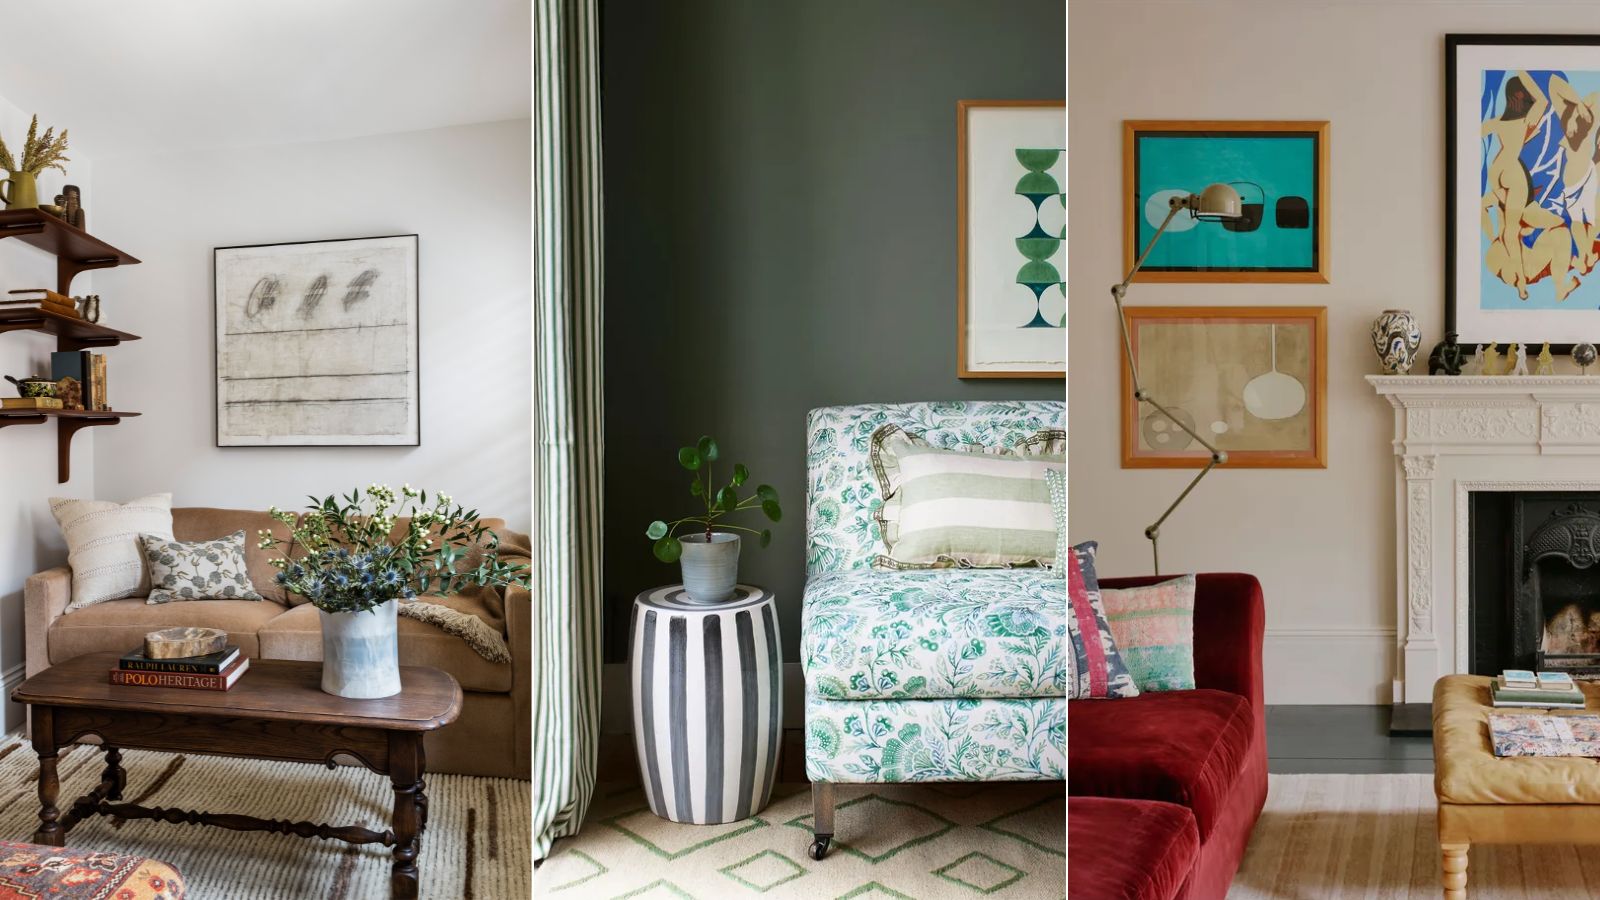 6 Calming Paint Colors For The Living